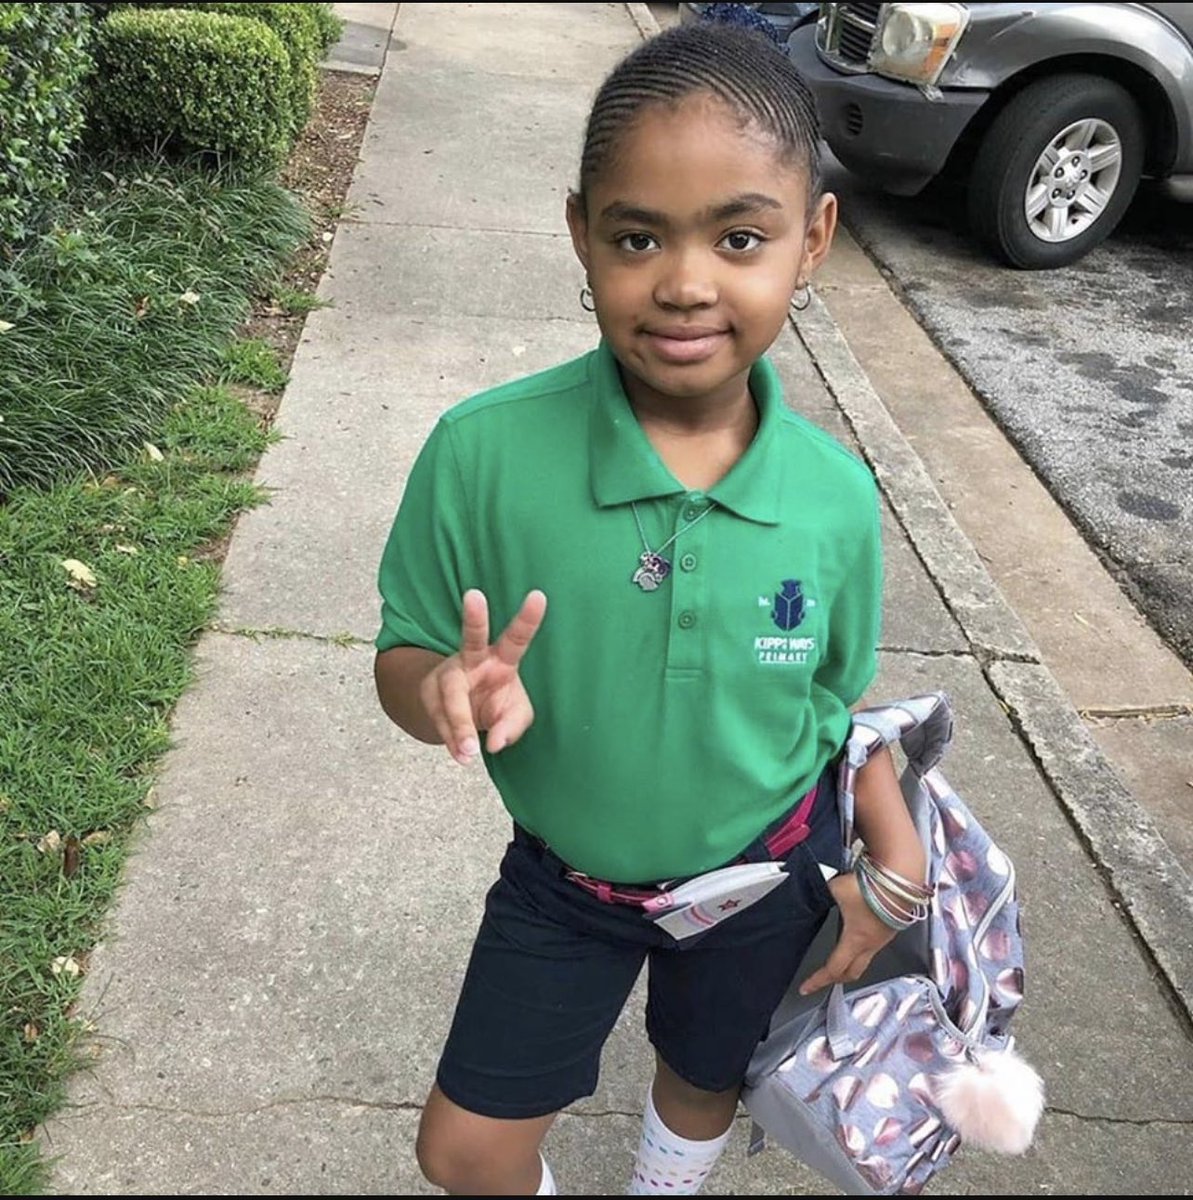 4th of July Weekend. 2020, the BLM protestors murdered Secoriea Turner. She was a beautiful 8 year old. Remember her. The left doesn’t know her name. https://t.co/nM5eBbwcL7 https://t.co/bkghDIoUsu